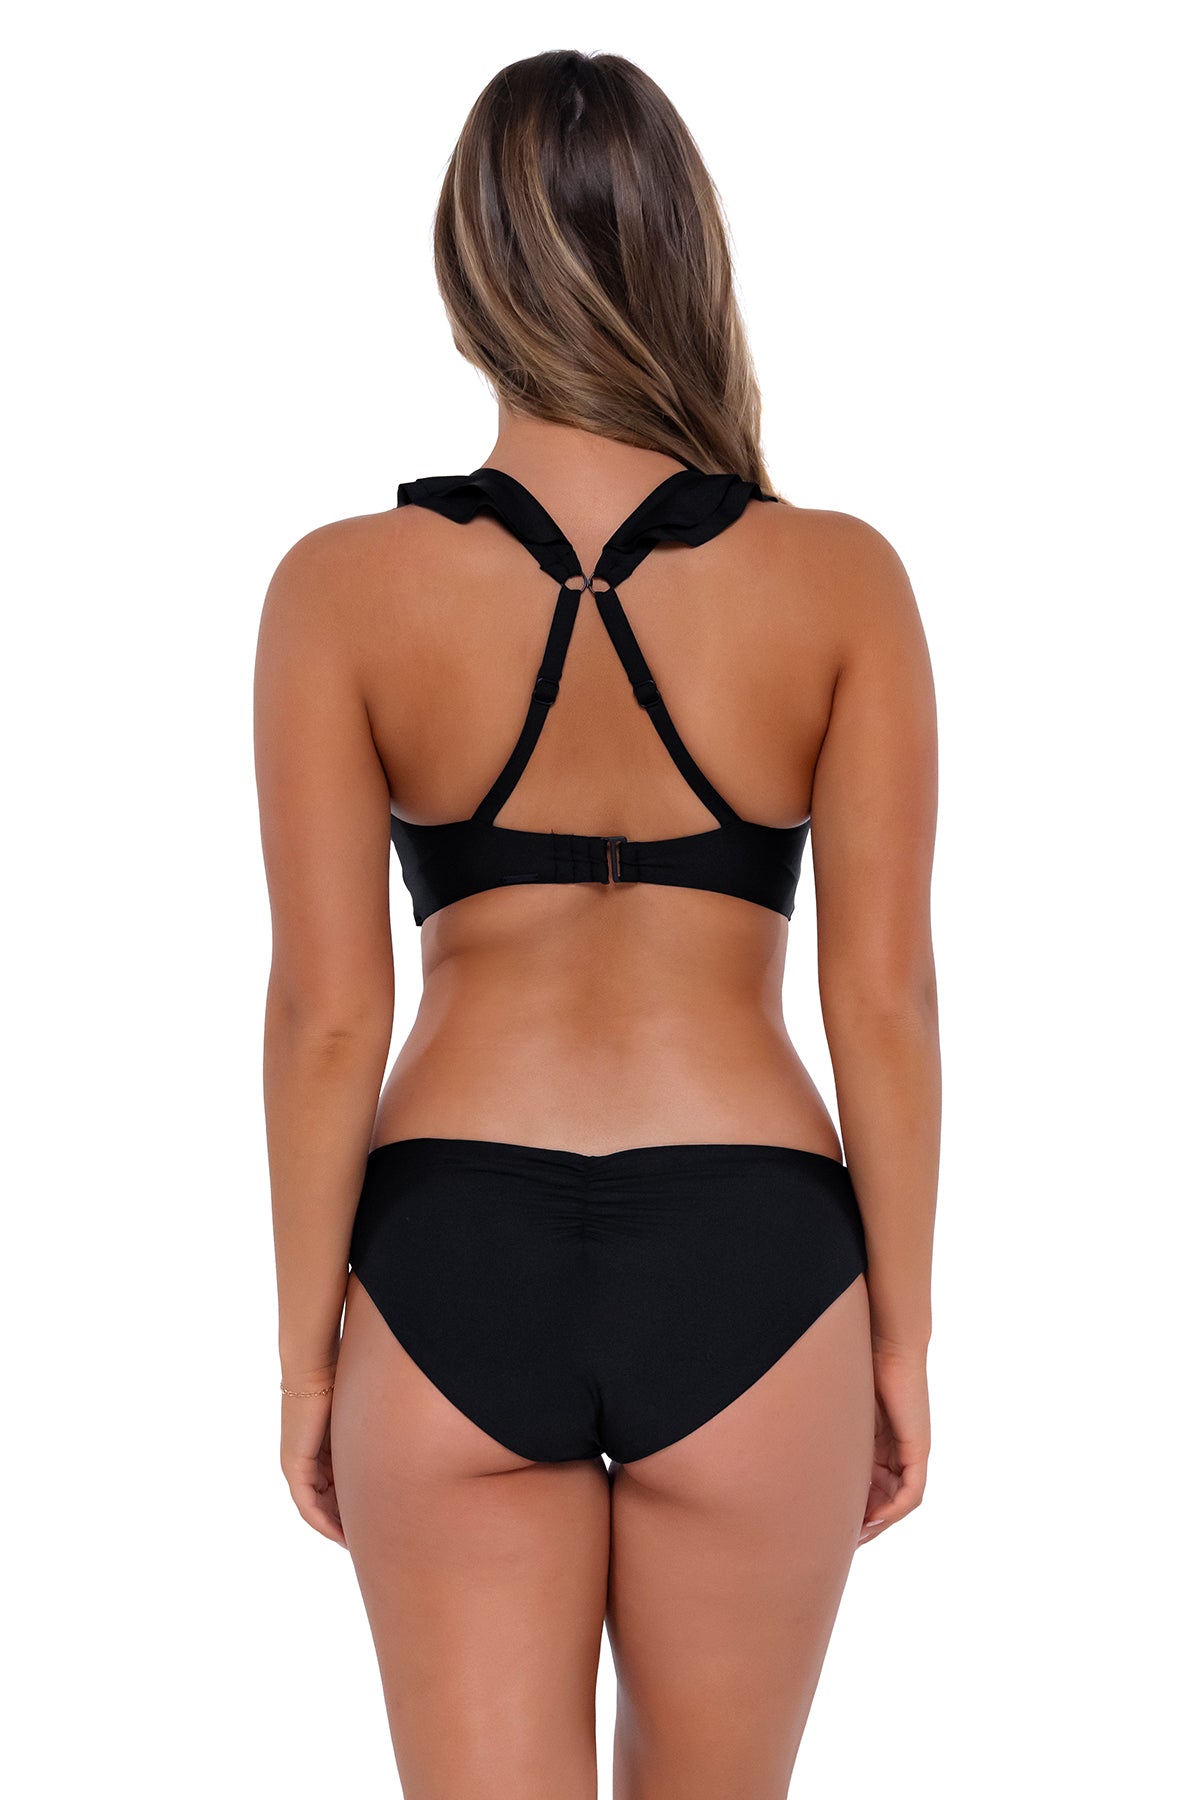 Back pose #1 of Taylor wearing Sunsets Black Willa Wireless Top showing crossback straps with matching Alana Reversible Hipster bikini bottom